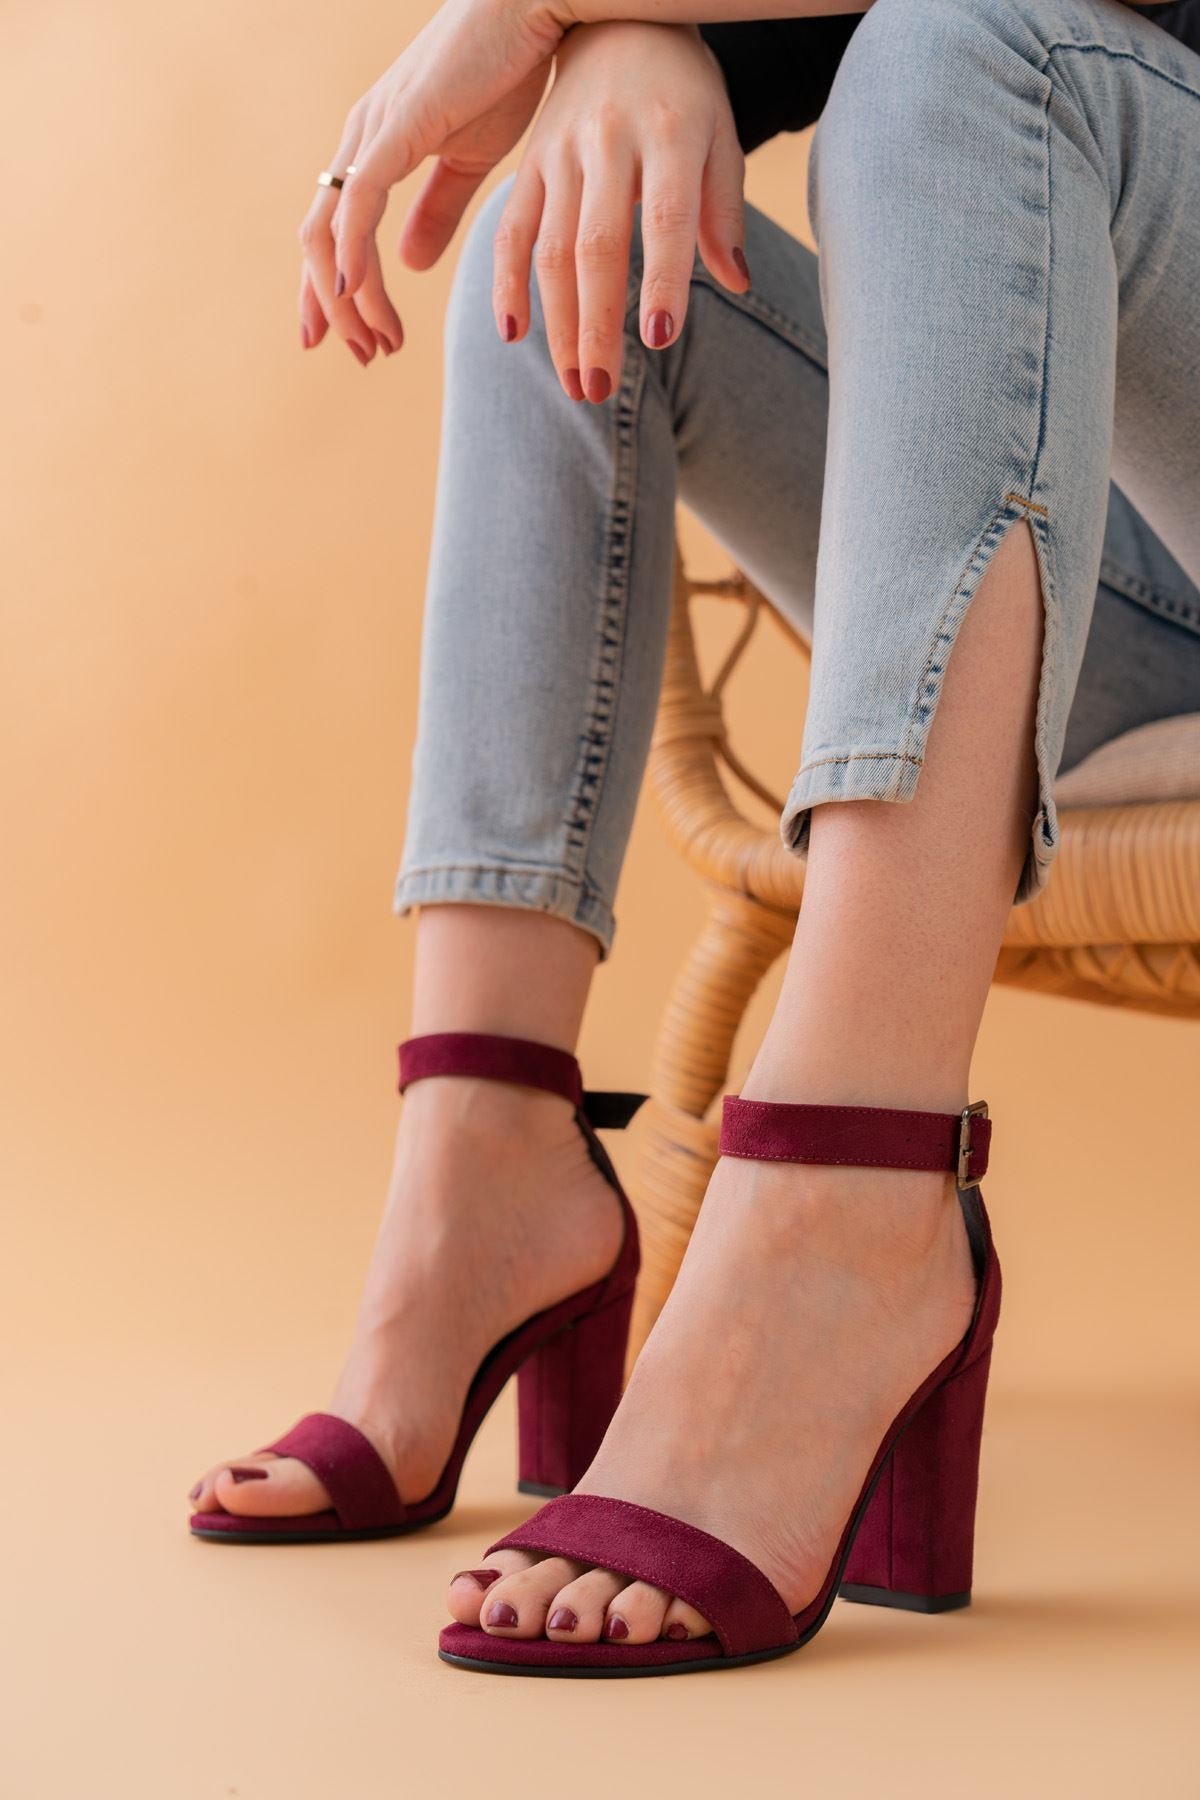 evdokia Women's Claret Red Suede Heeled Shoes - STREETMODE ™